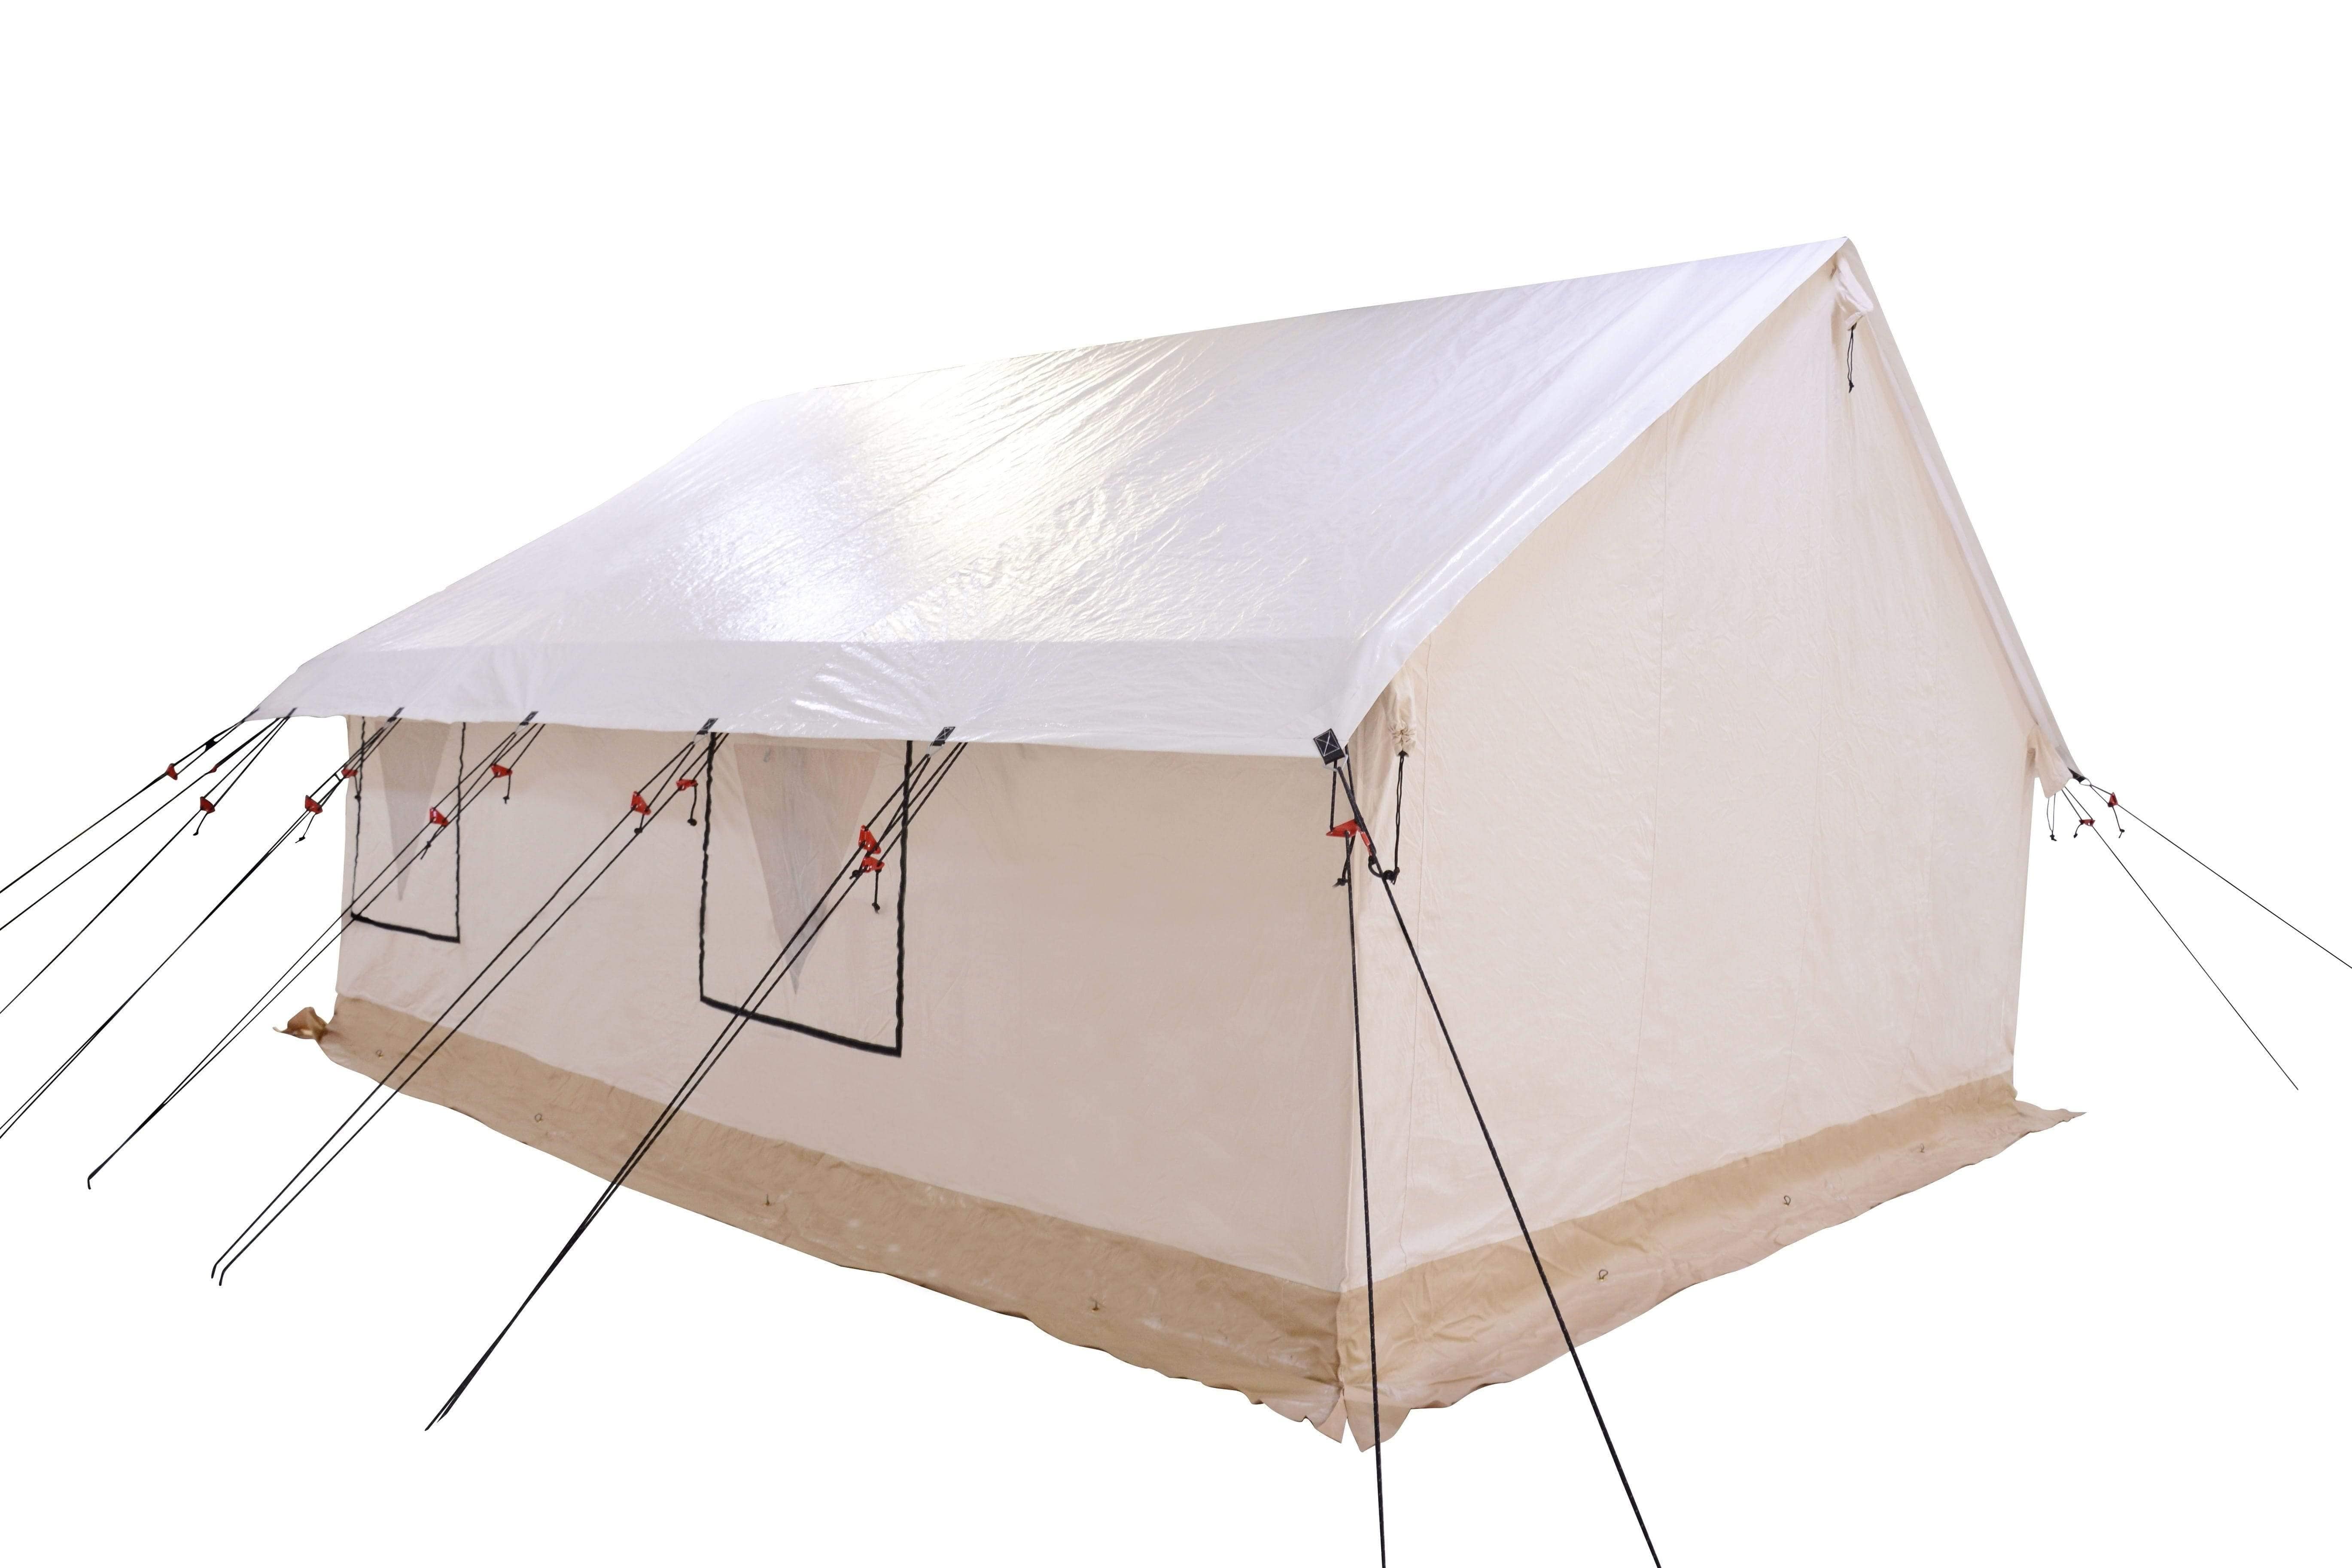 16’x24’ Fly Sheet - Canvas Wall Tent